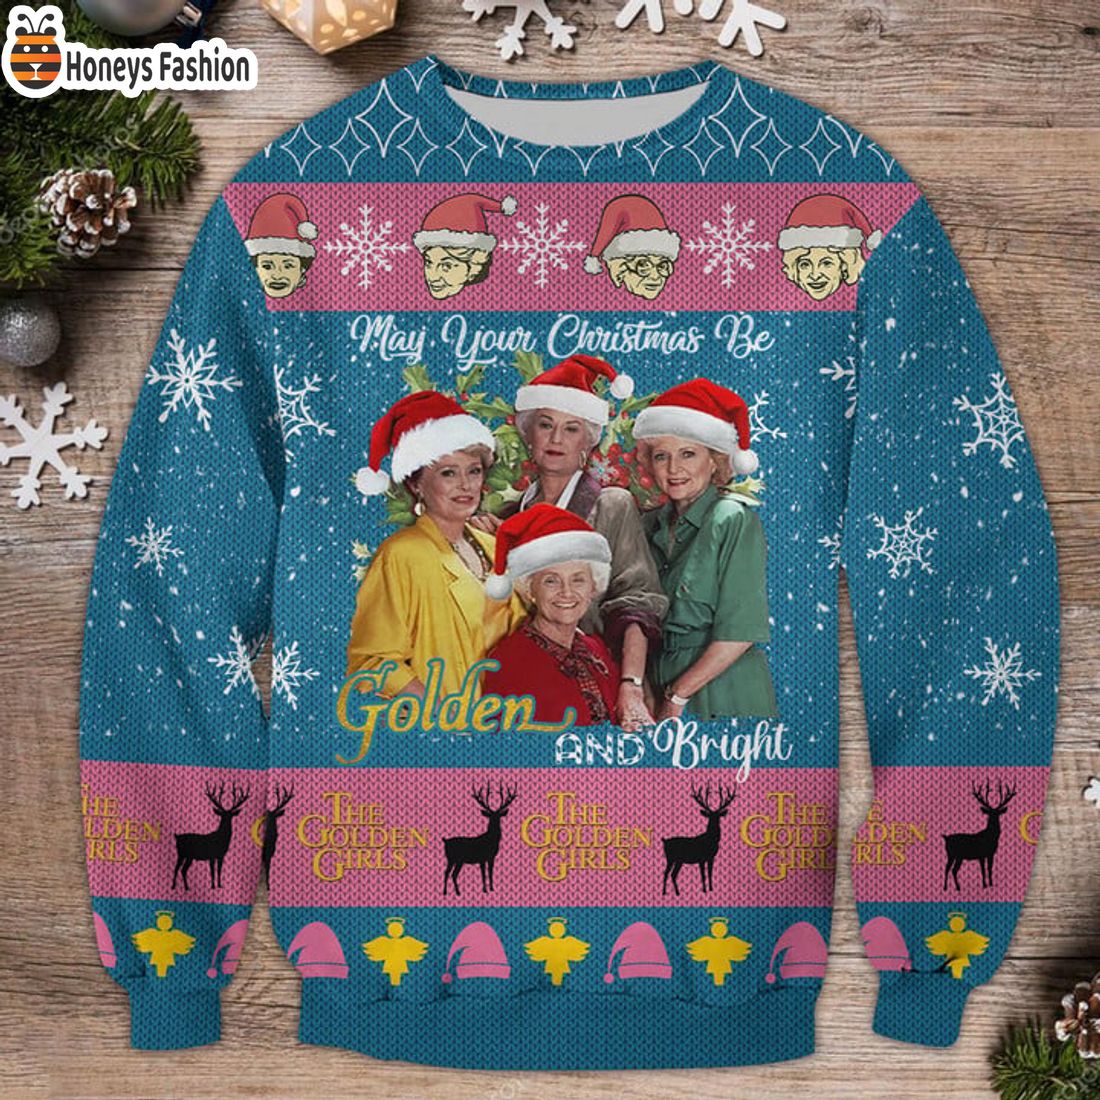 TRENDING The Golden Girls may your christmas be golden and bright ugly sweater